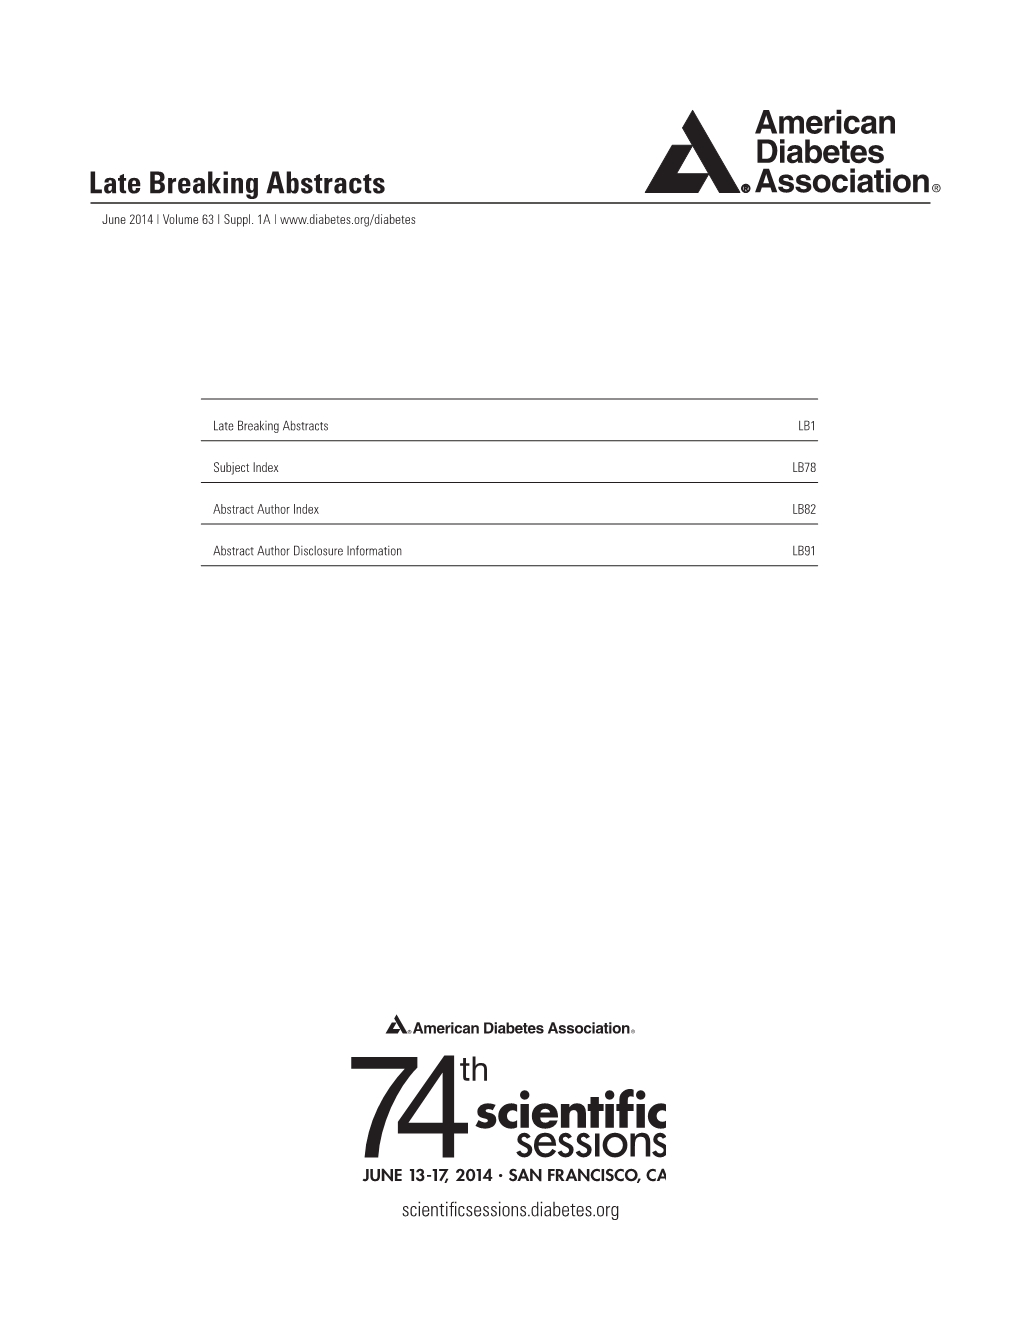 Late Breaking Abstracts from ADA 2014